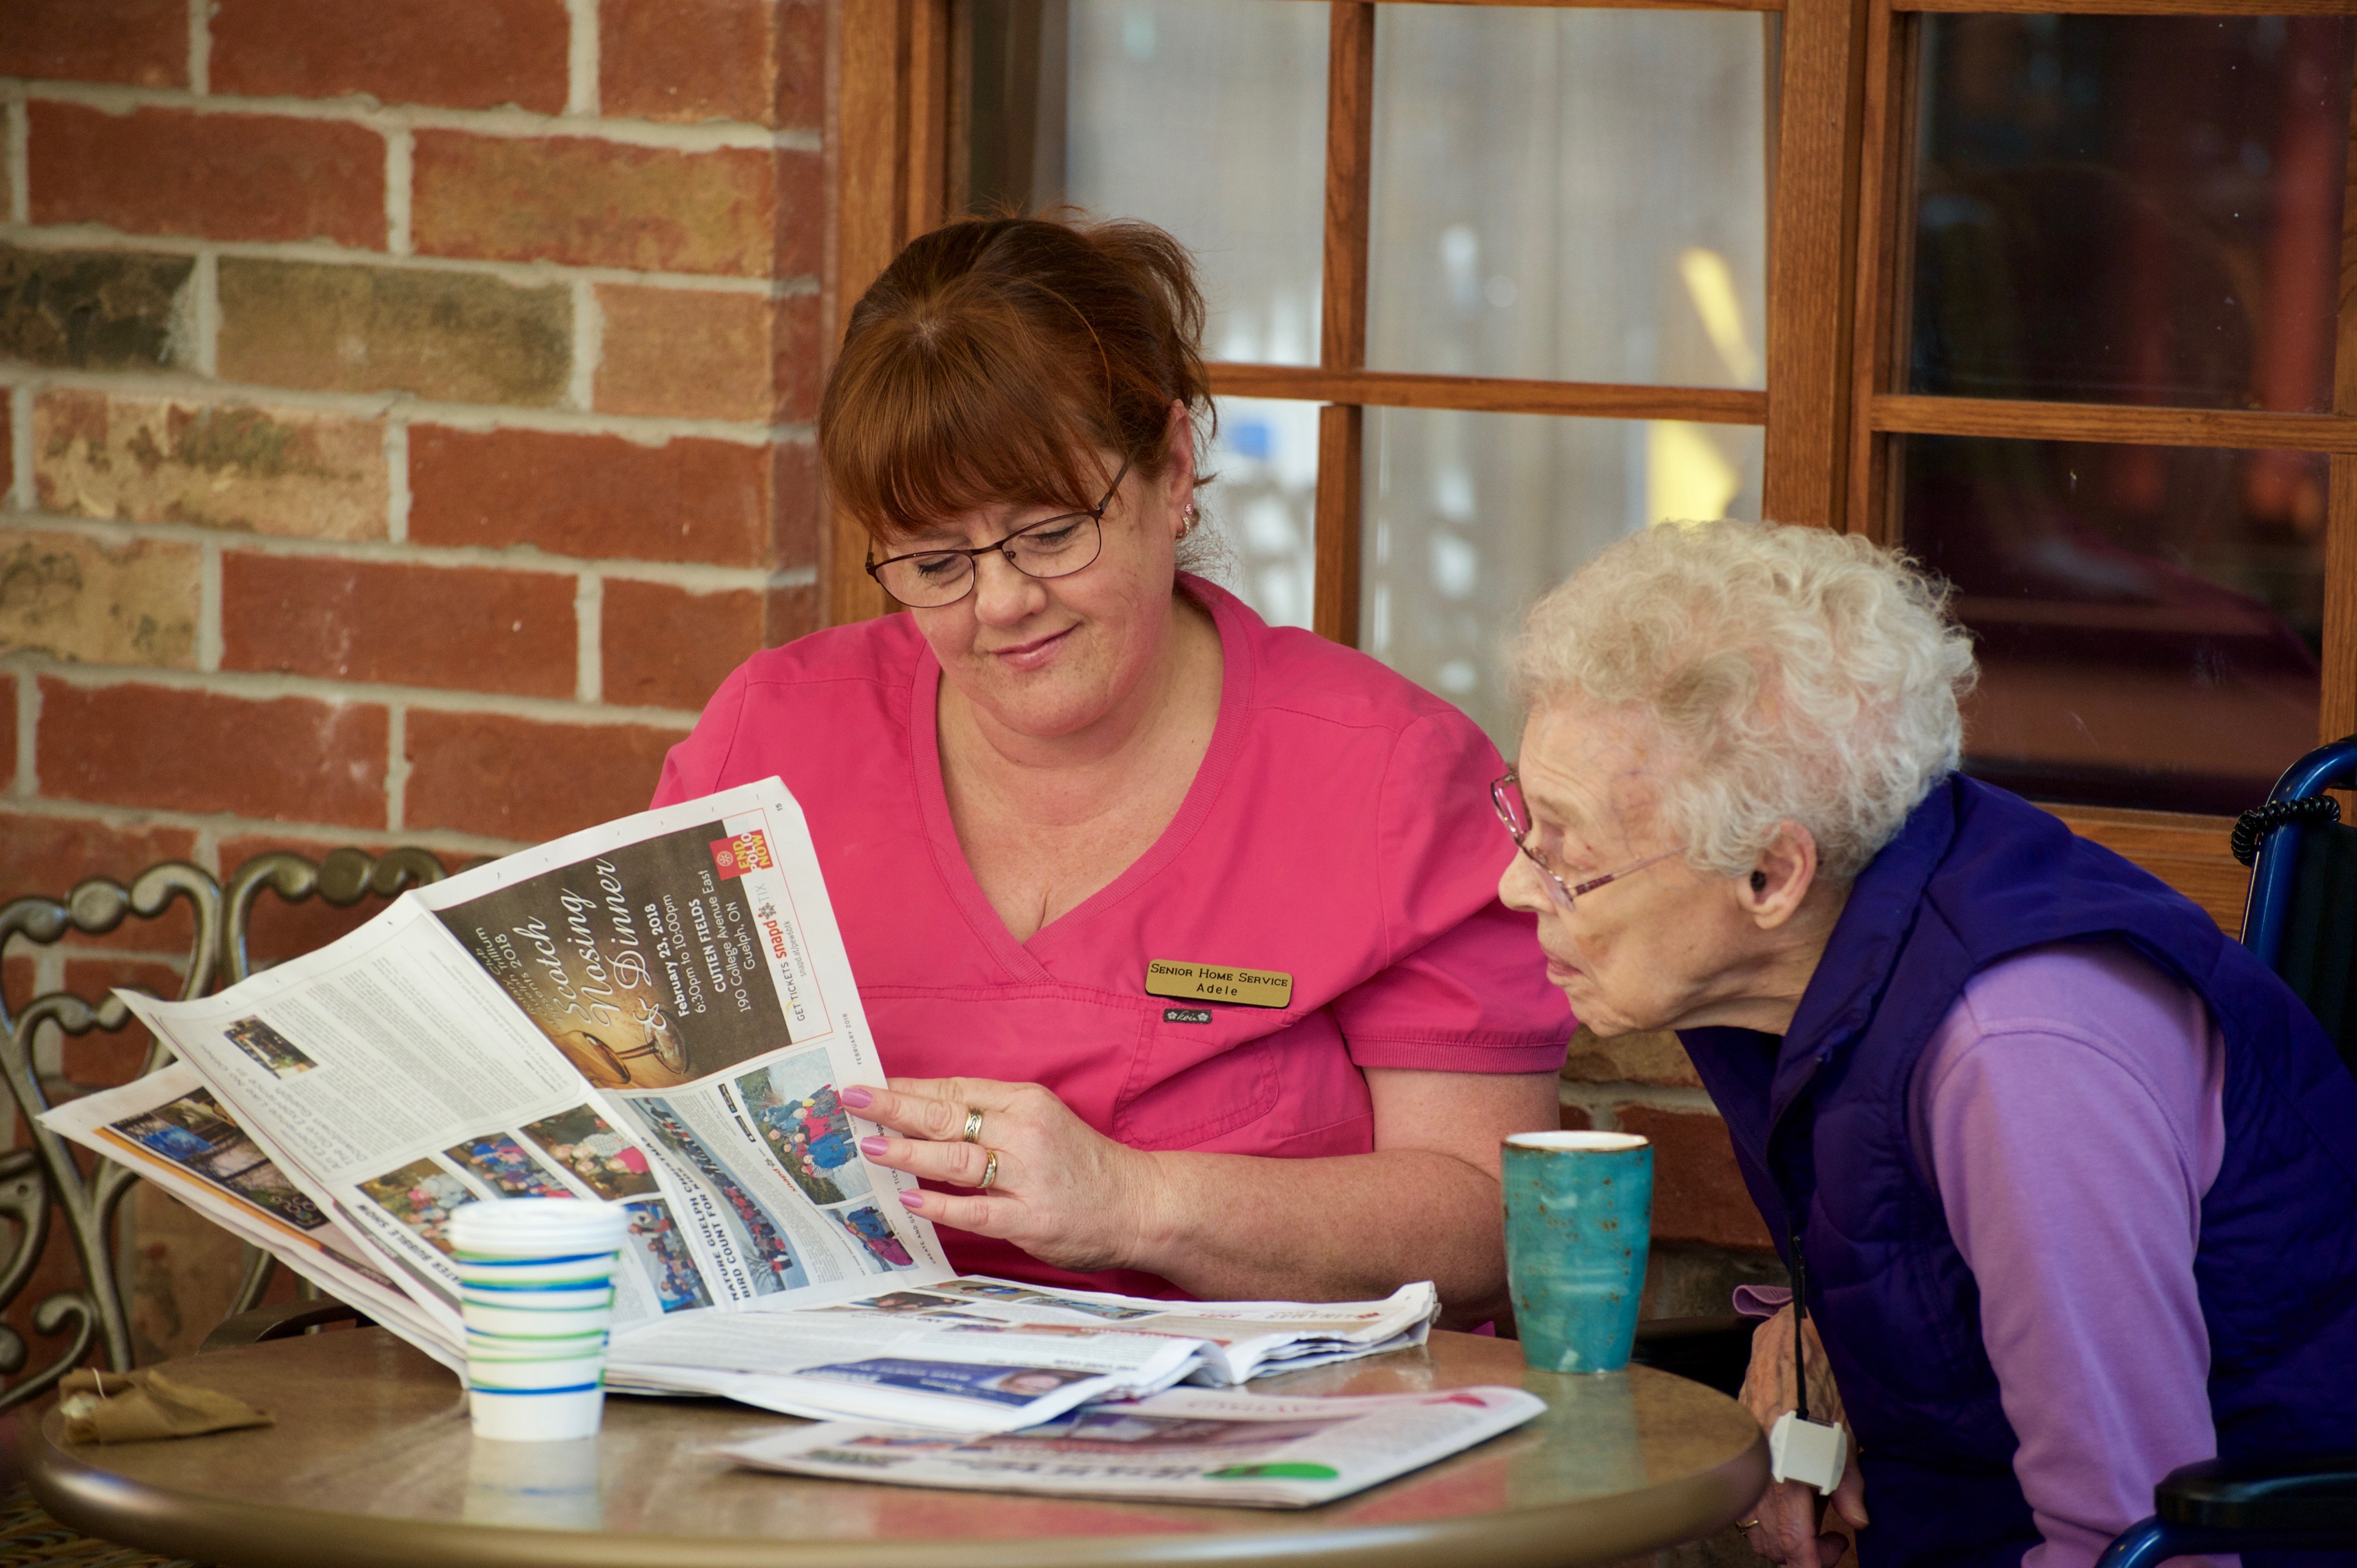 Resident and caregiver reading the newspaper over a coffee